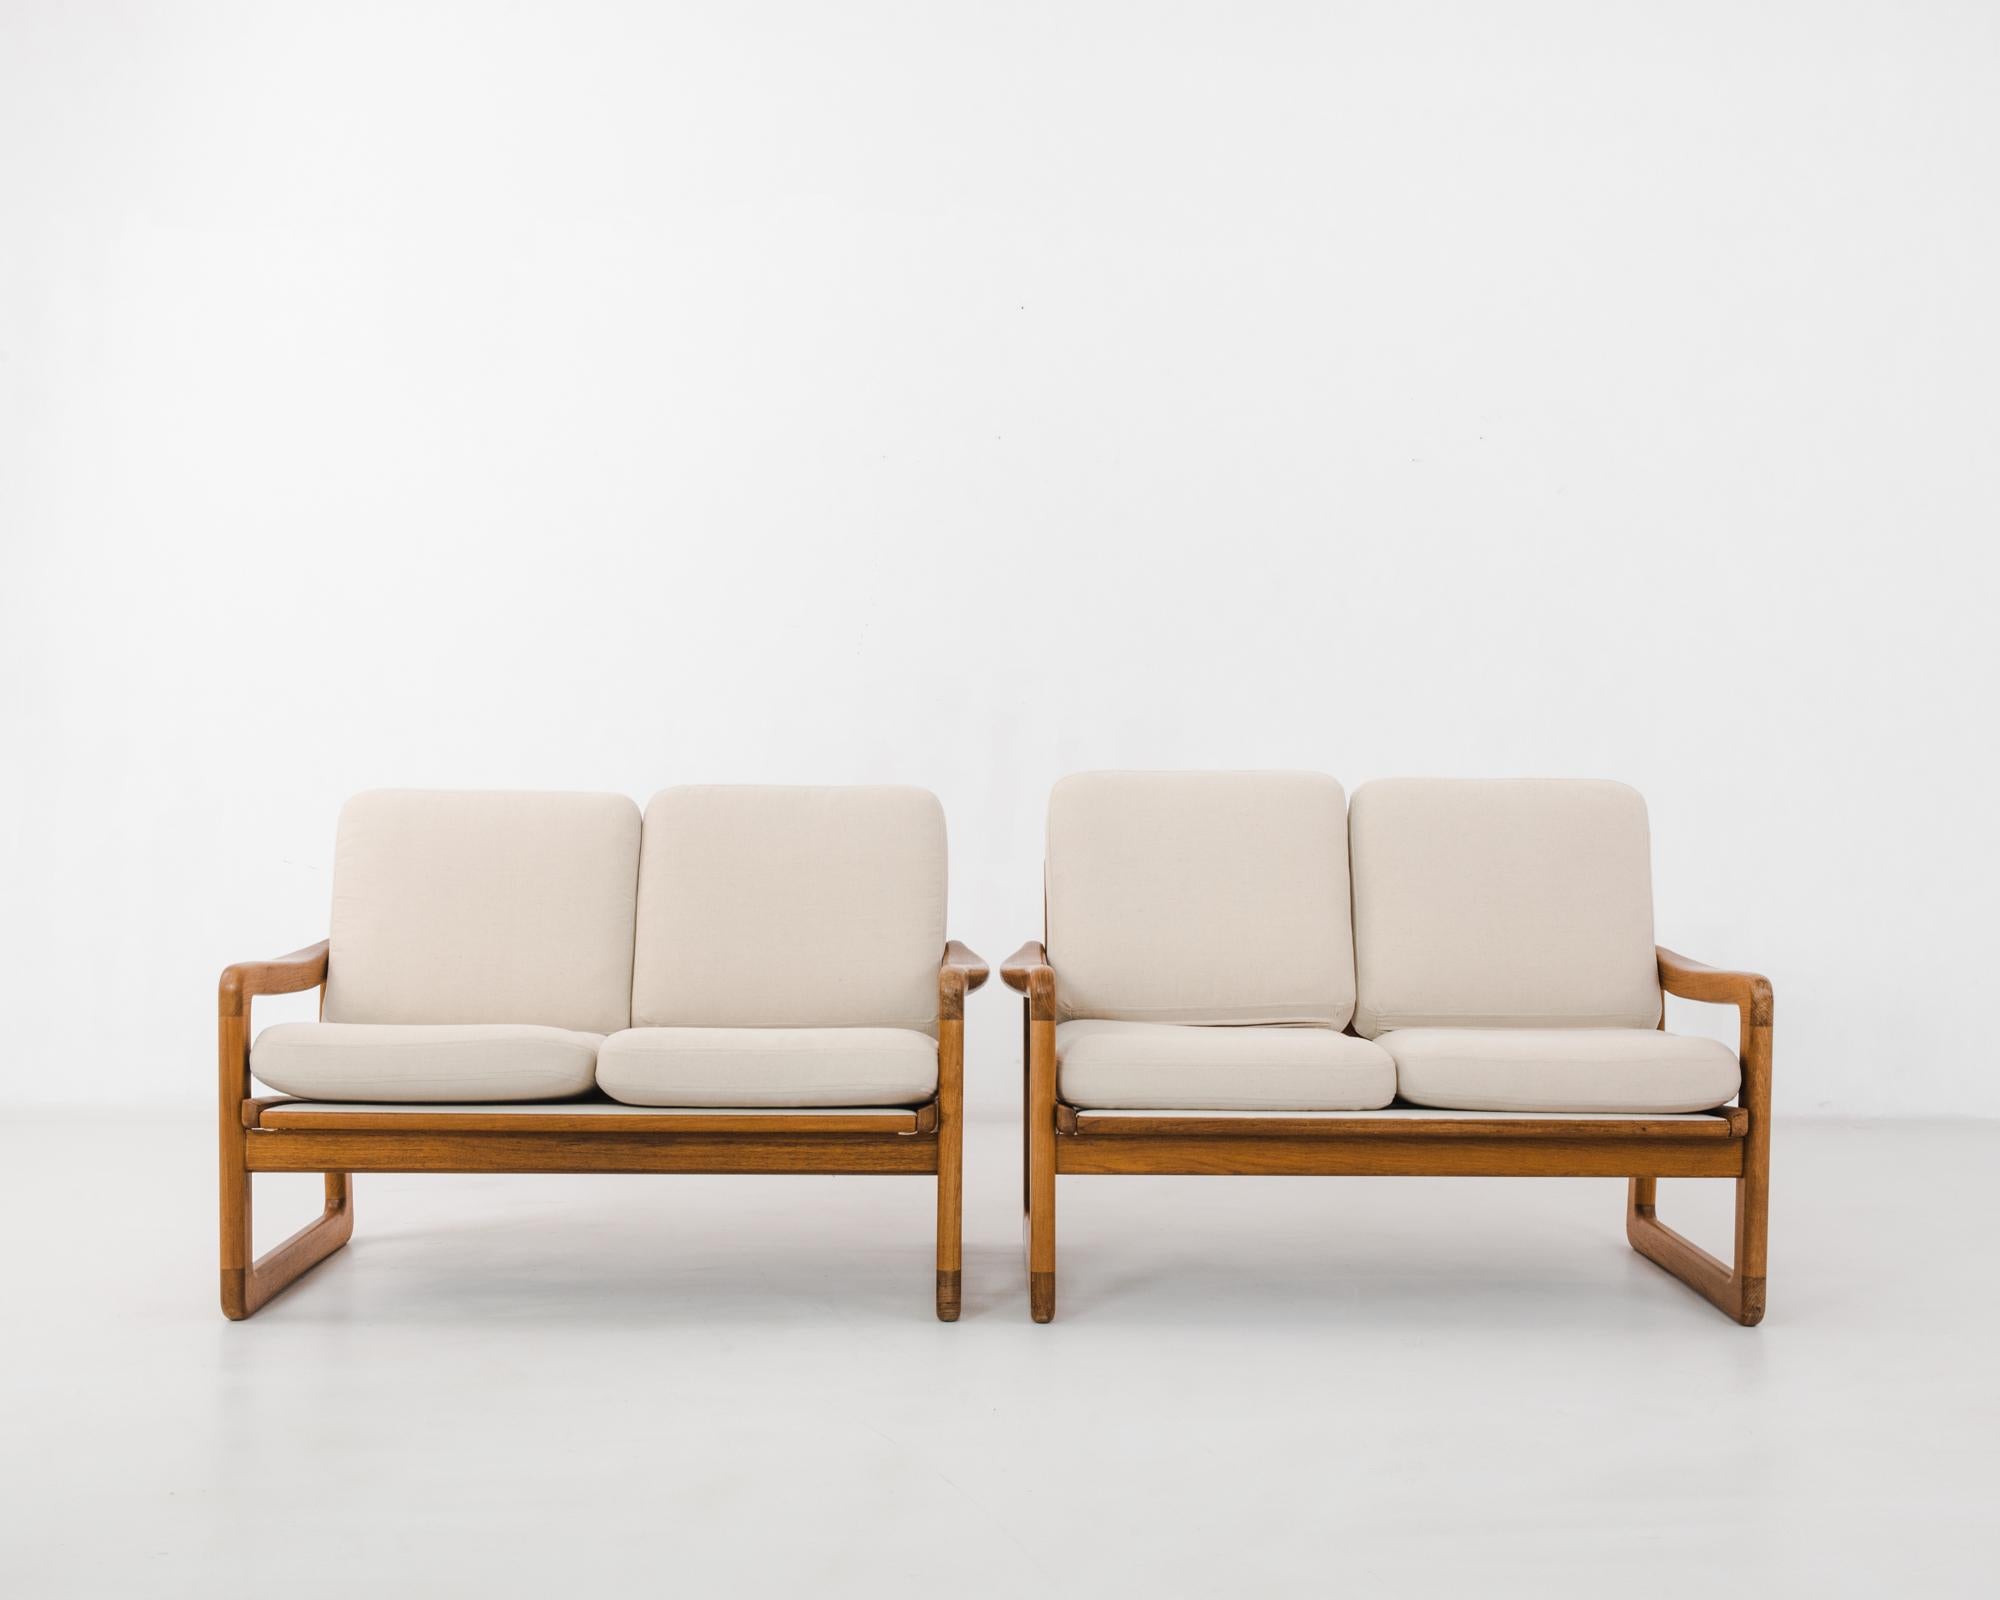 A pair of teak sofas from 1970s Denmark. The clean lines of the frame evoke a sense of stylish ease, characteristic of Scandinavian modernist design. Seat cushions are upholstered in a natural white, creating a fresh contrast with the warm polish of